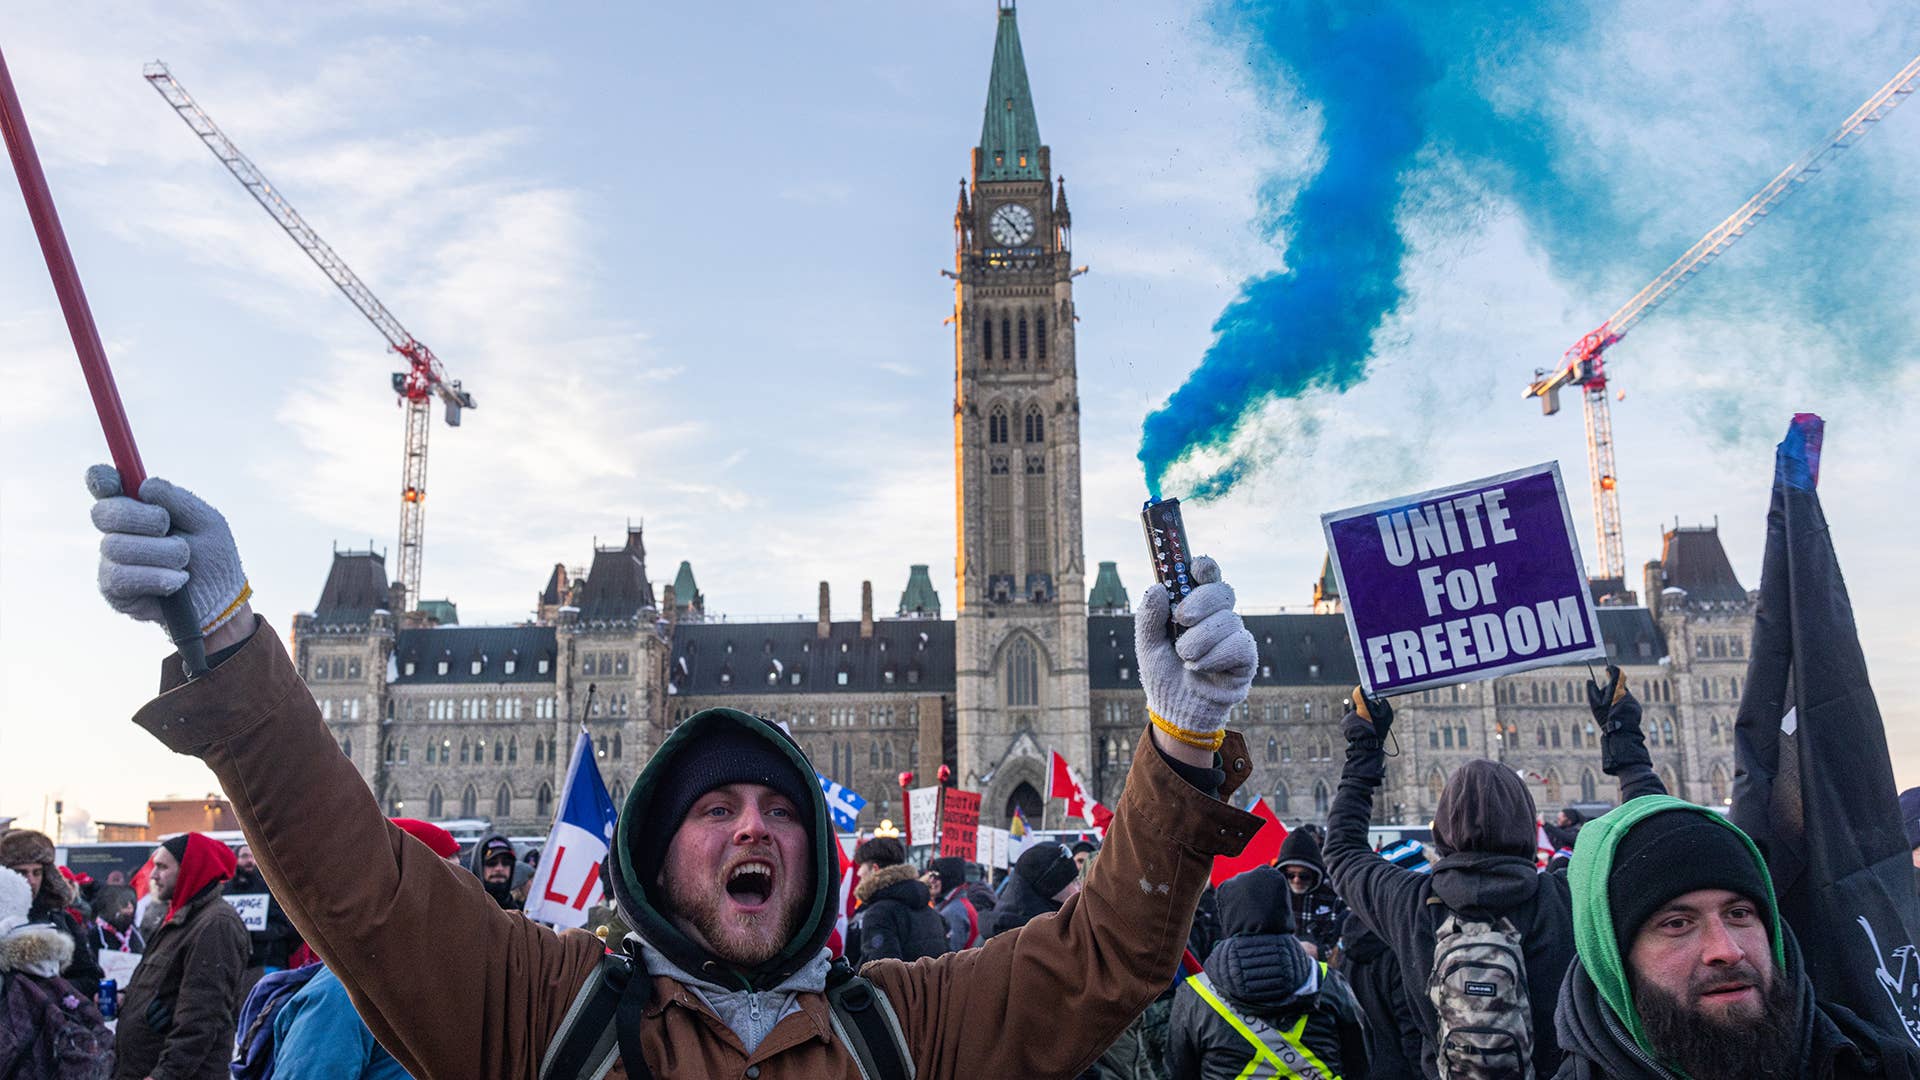 Protestors on parliament hill with signs and smoke flares